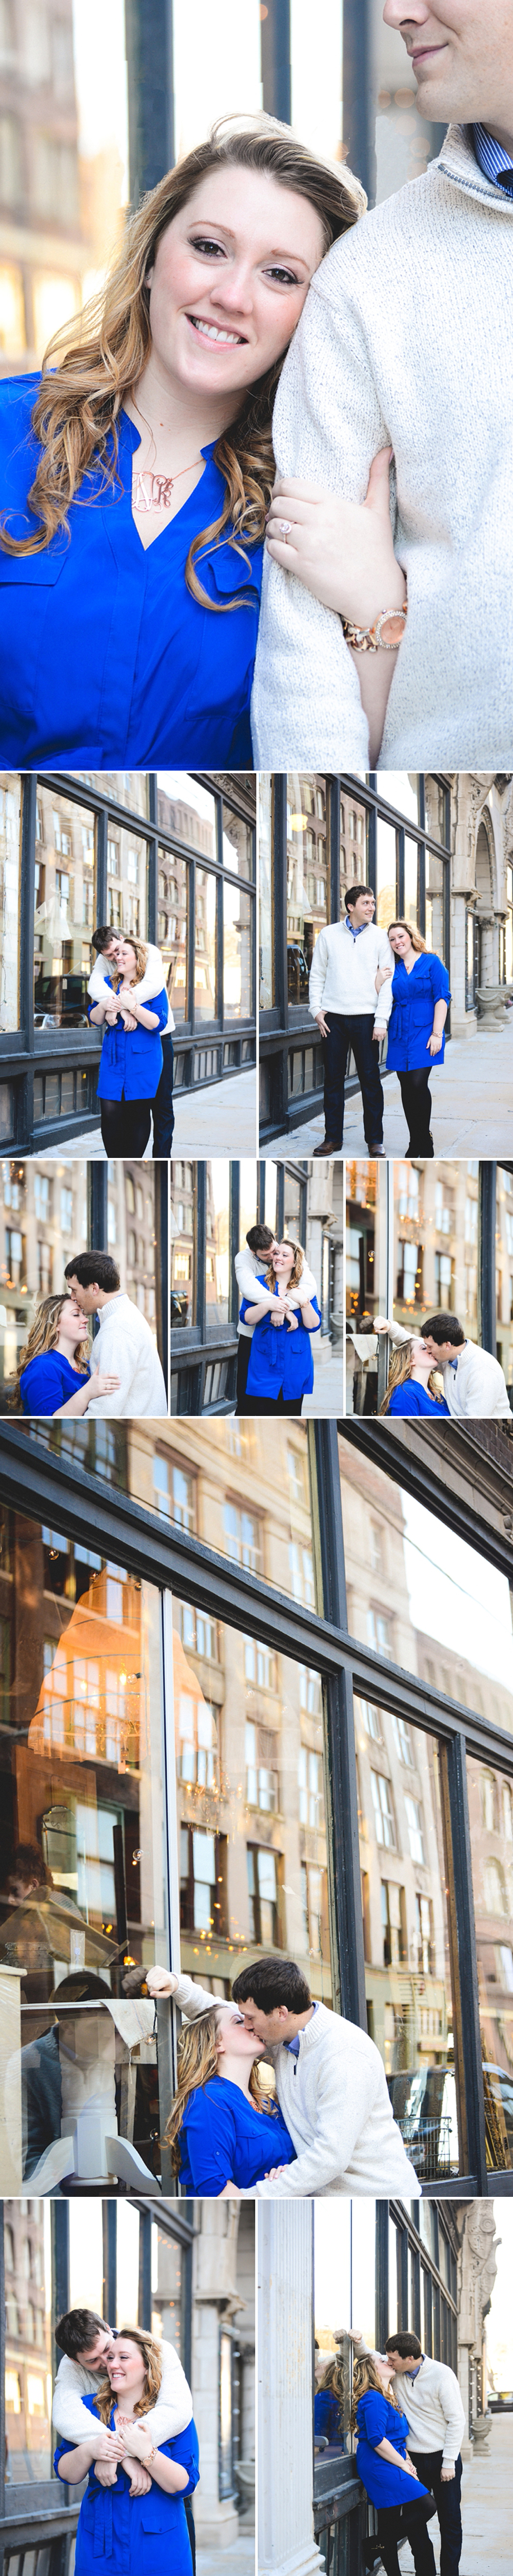 A-colorful-urban-downtown-kansas-city-engagement-shoot-in-the-west-bottoms-lacey-rene-studios-1.jpg